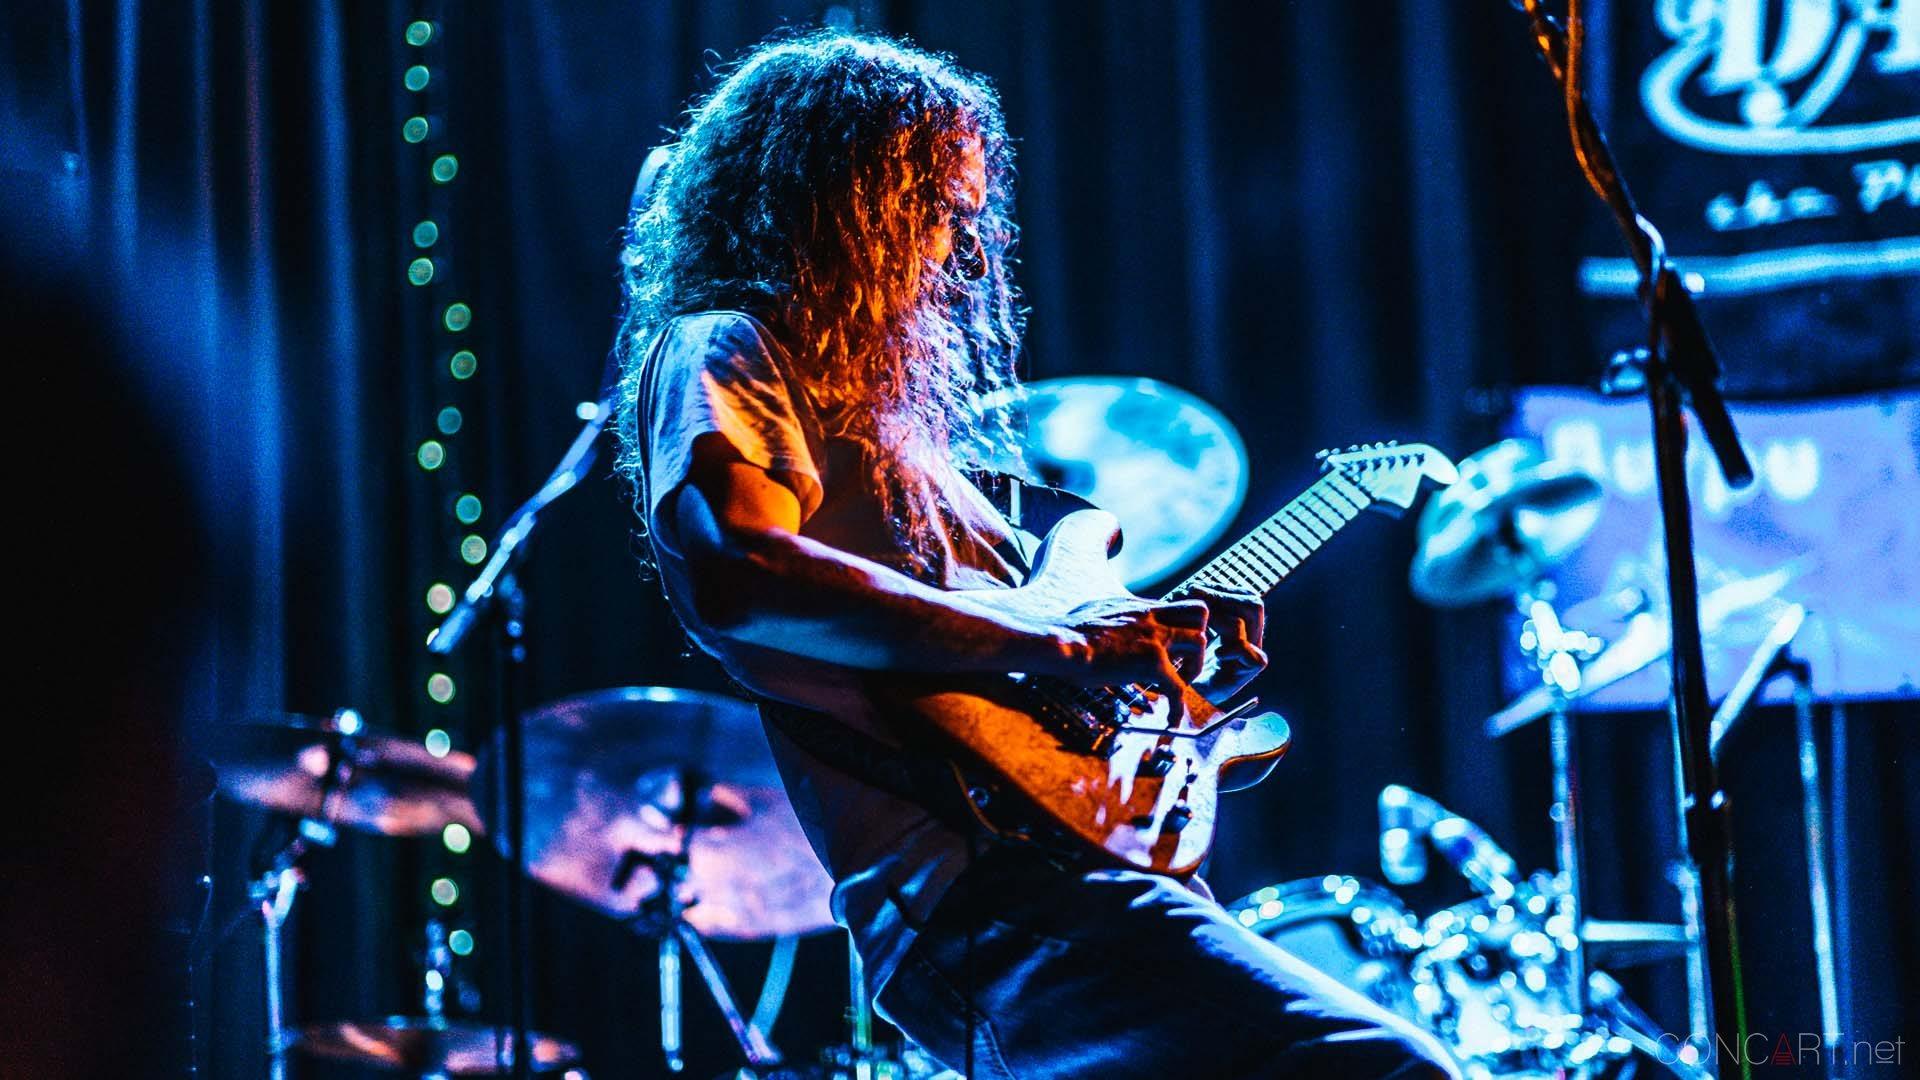 Hard Rock Cafe Will Be Hosting Guthrie Govan's India Tour This Month!